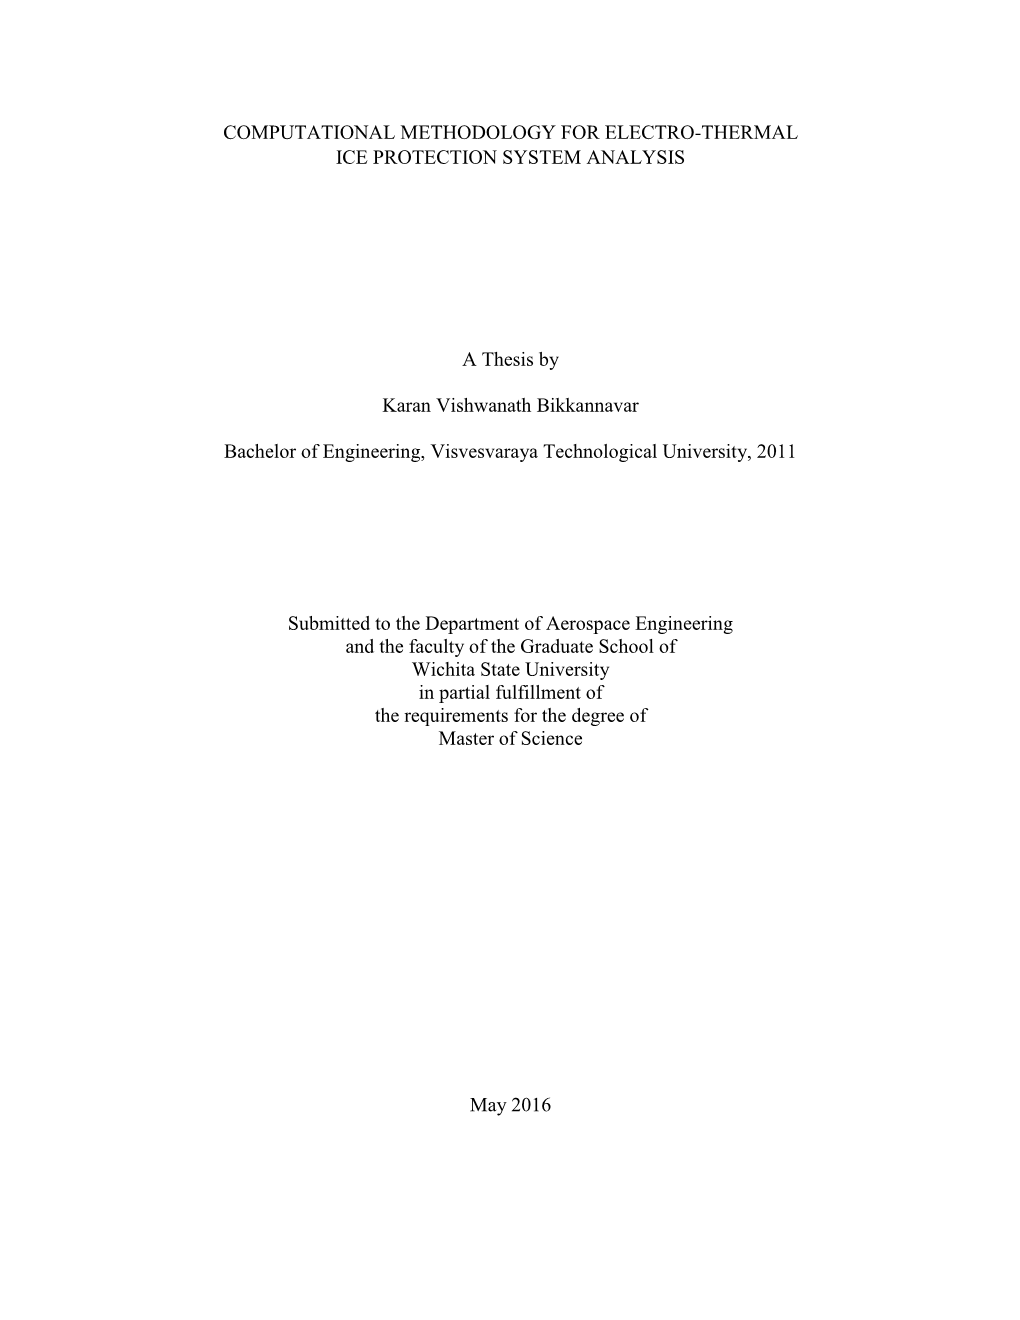 Computational Methodology for Electro-Thermal Ice Protection System Analysis